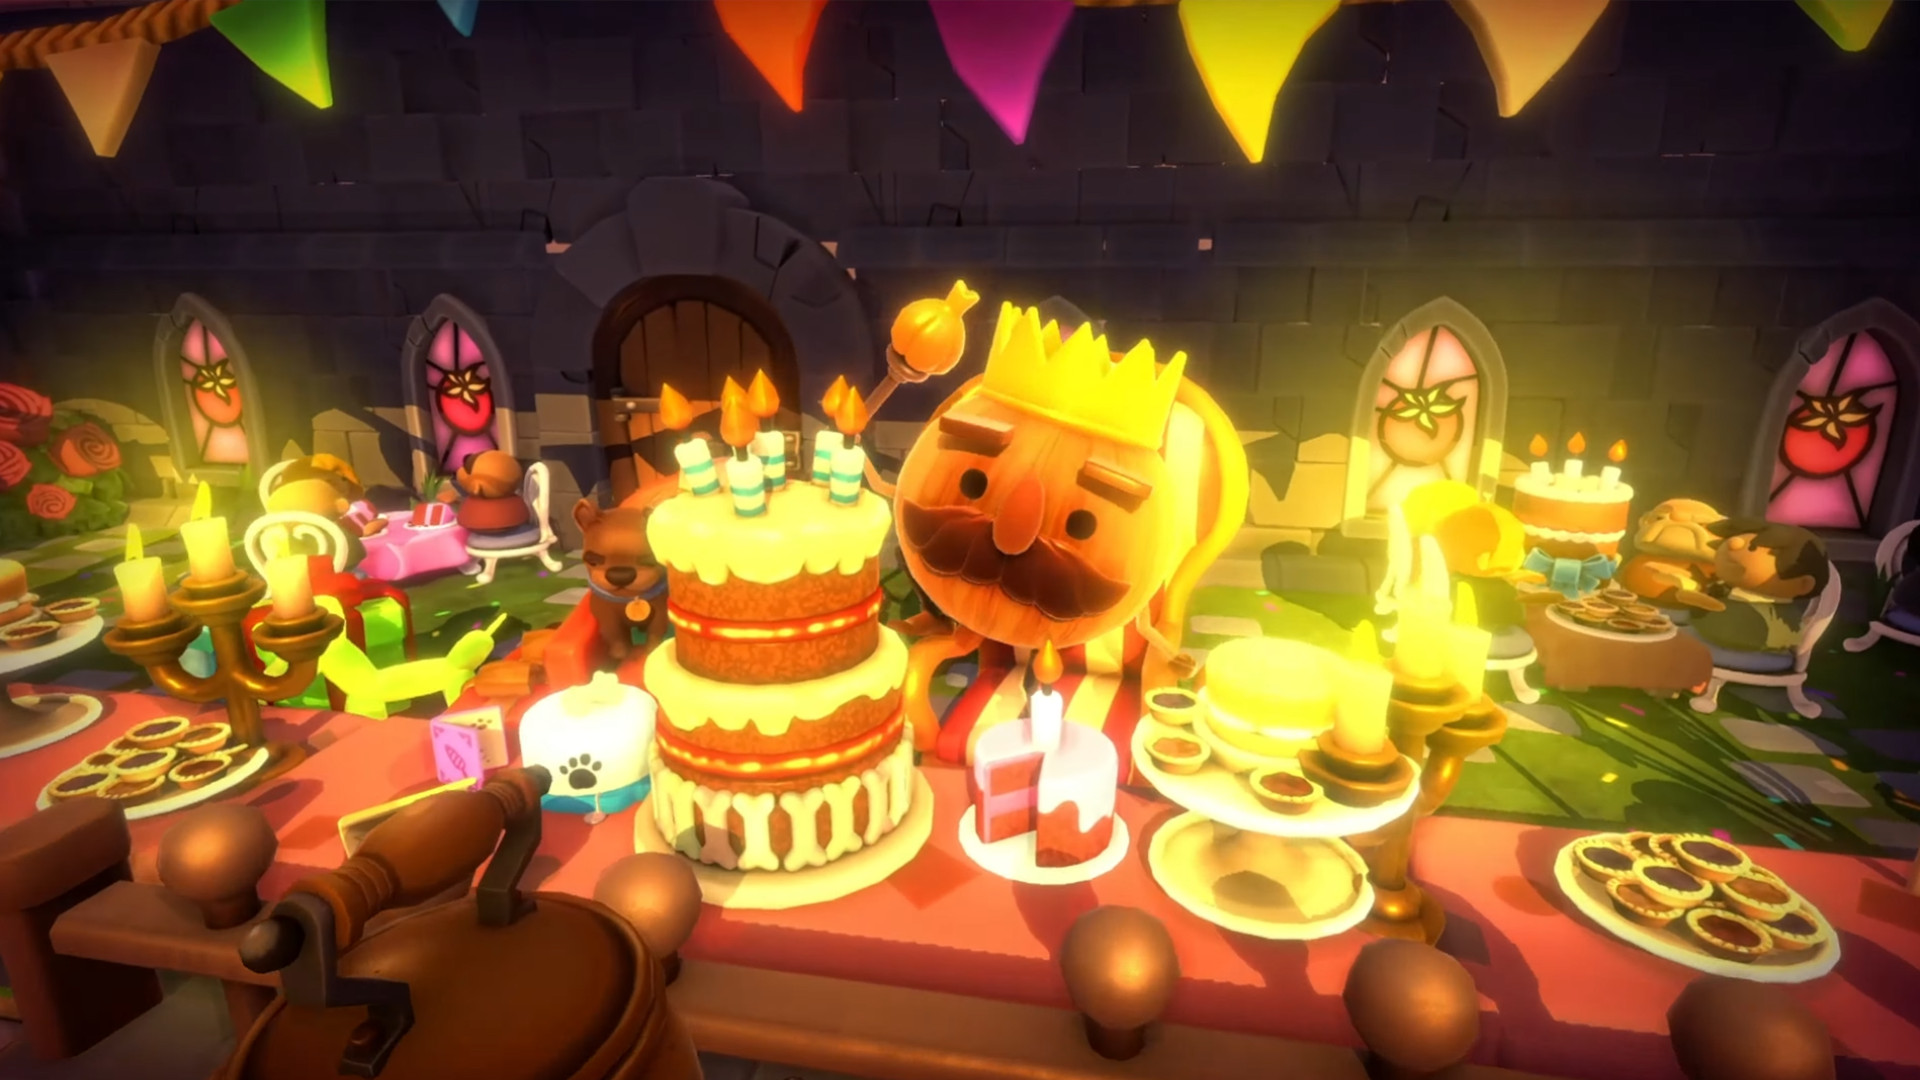 Overcooked gets a free birthday update, but only for the pricier new version